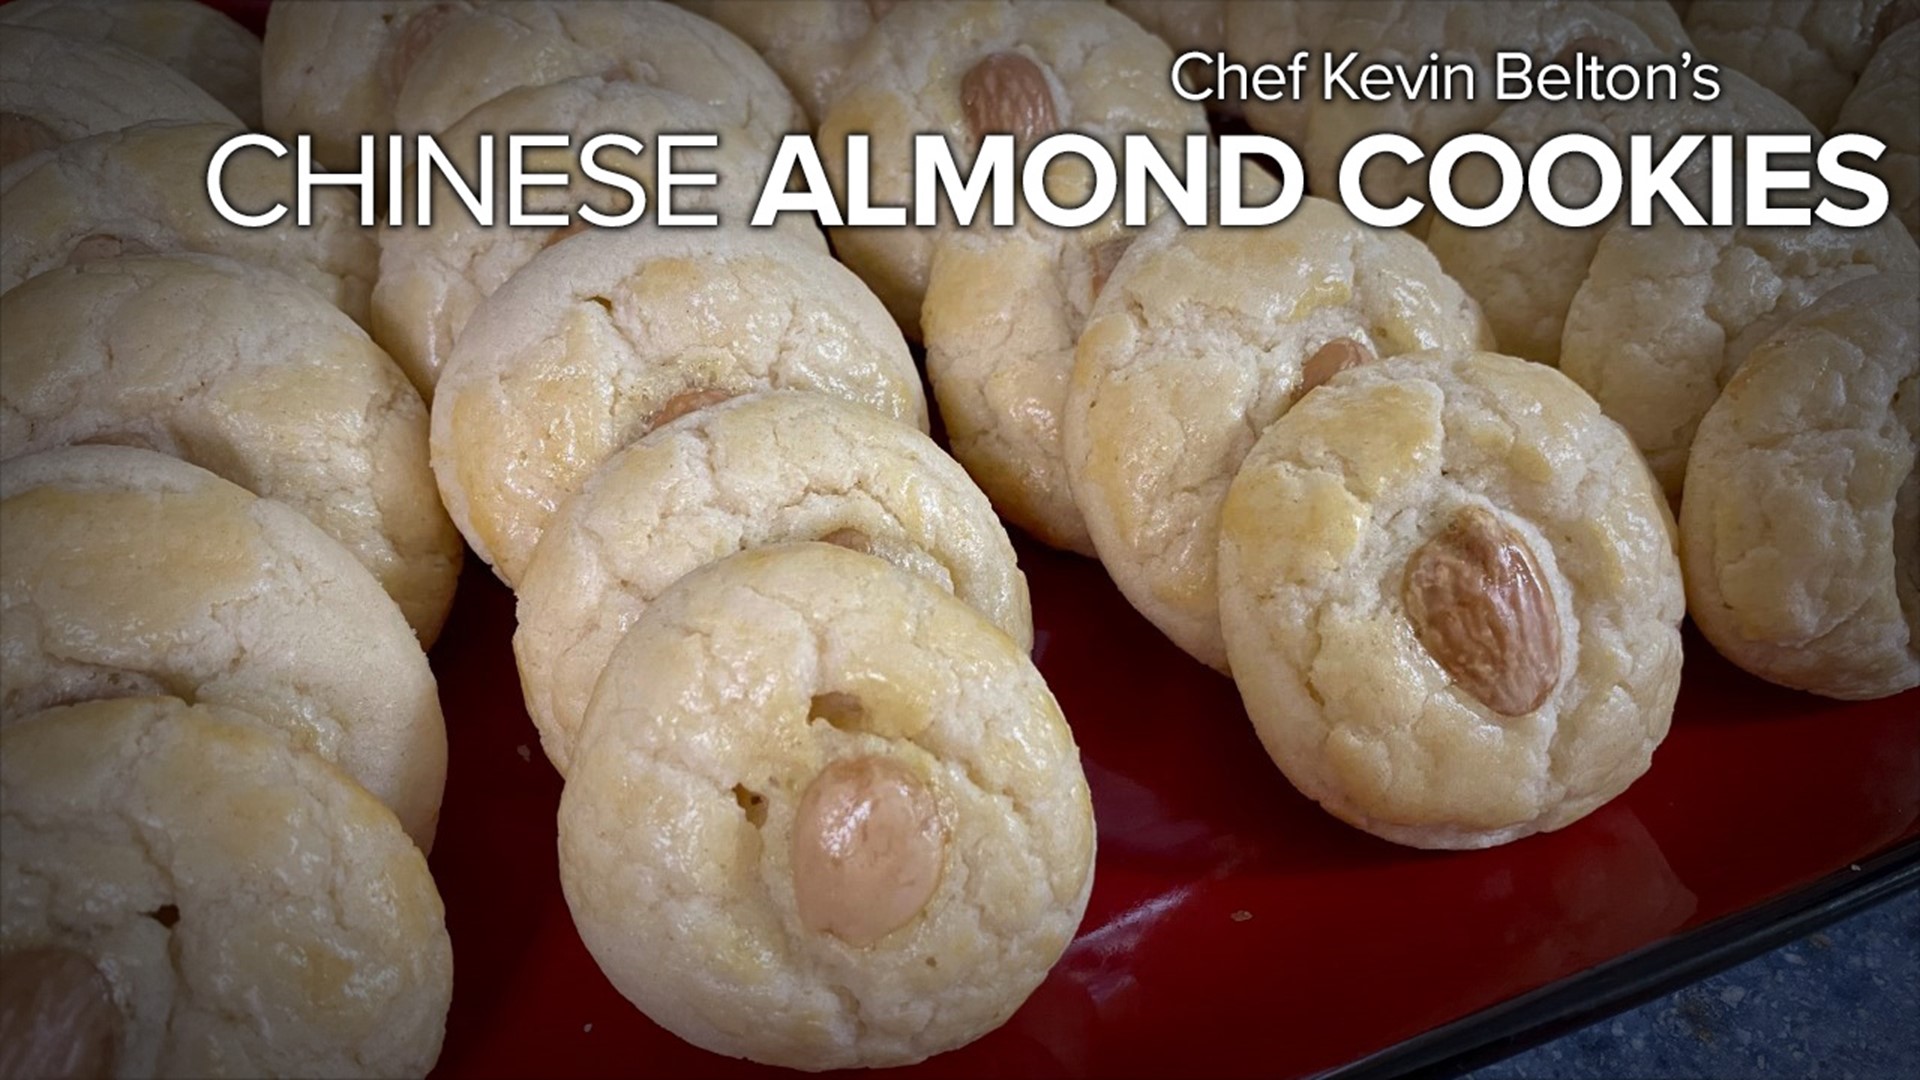 If you've never had a Chinese almond cookie, then you're missing out!